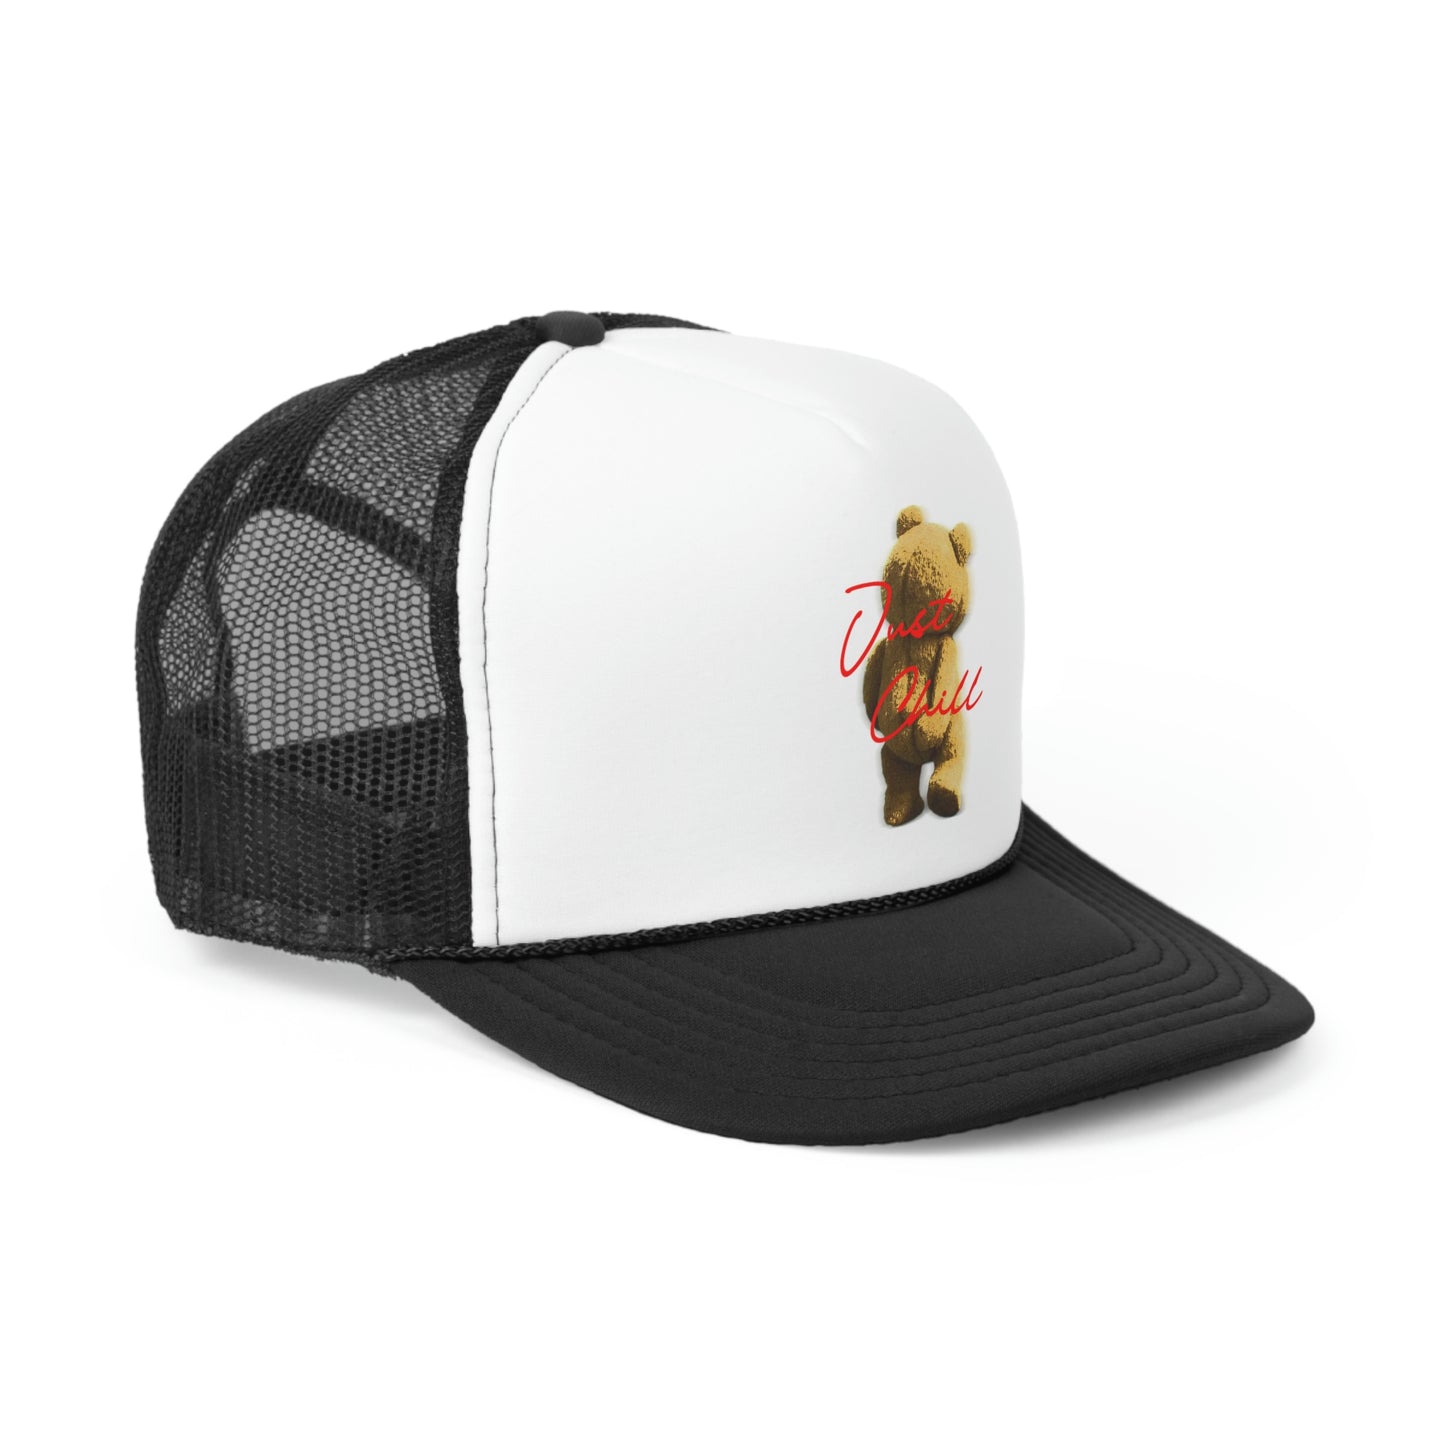 Side view - Vintage-inspired trucker hat in black, featuring a mesh back and snapback closure. Retro design with a curved brim, perfect for a casual and stylish addition to your accessories.